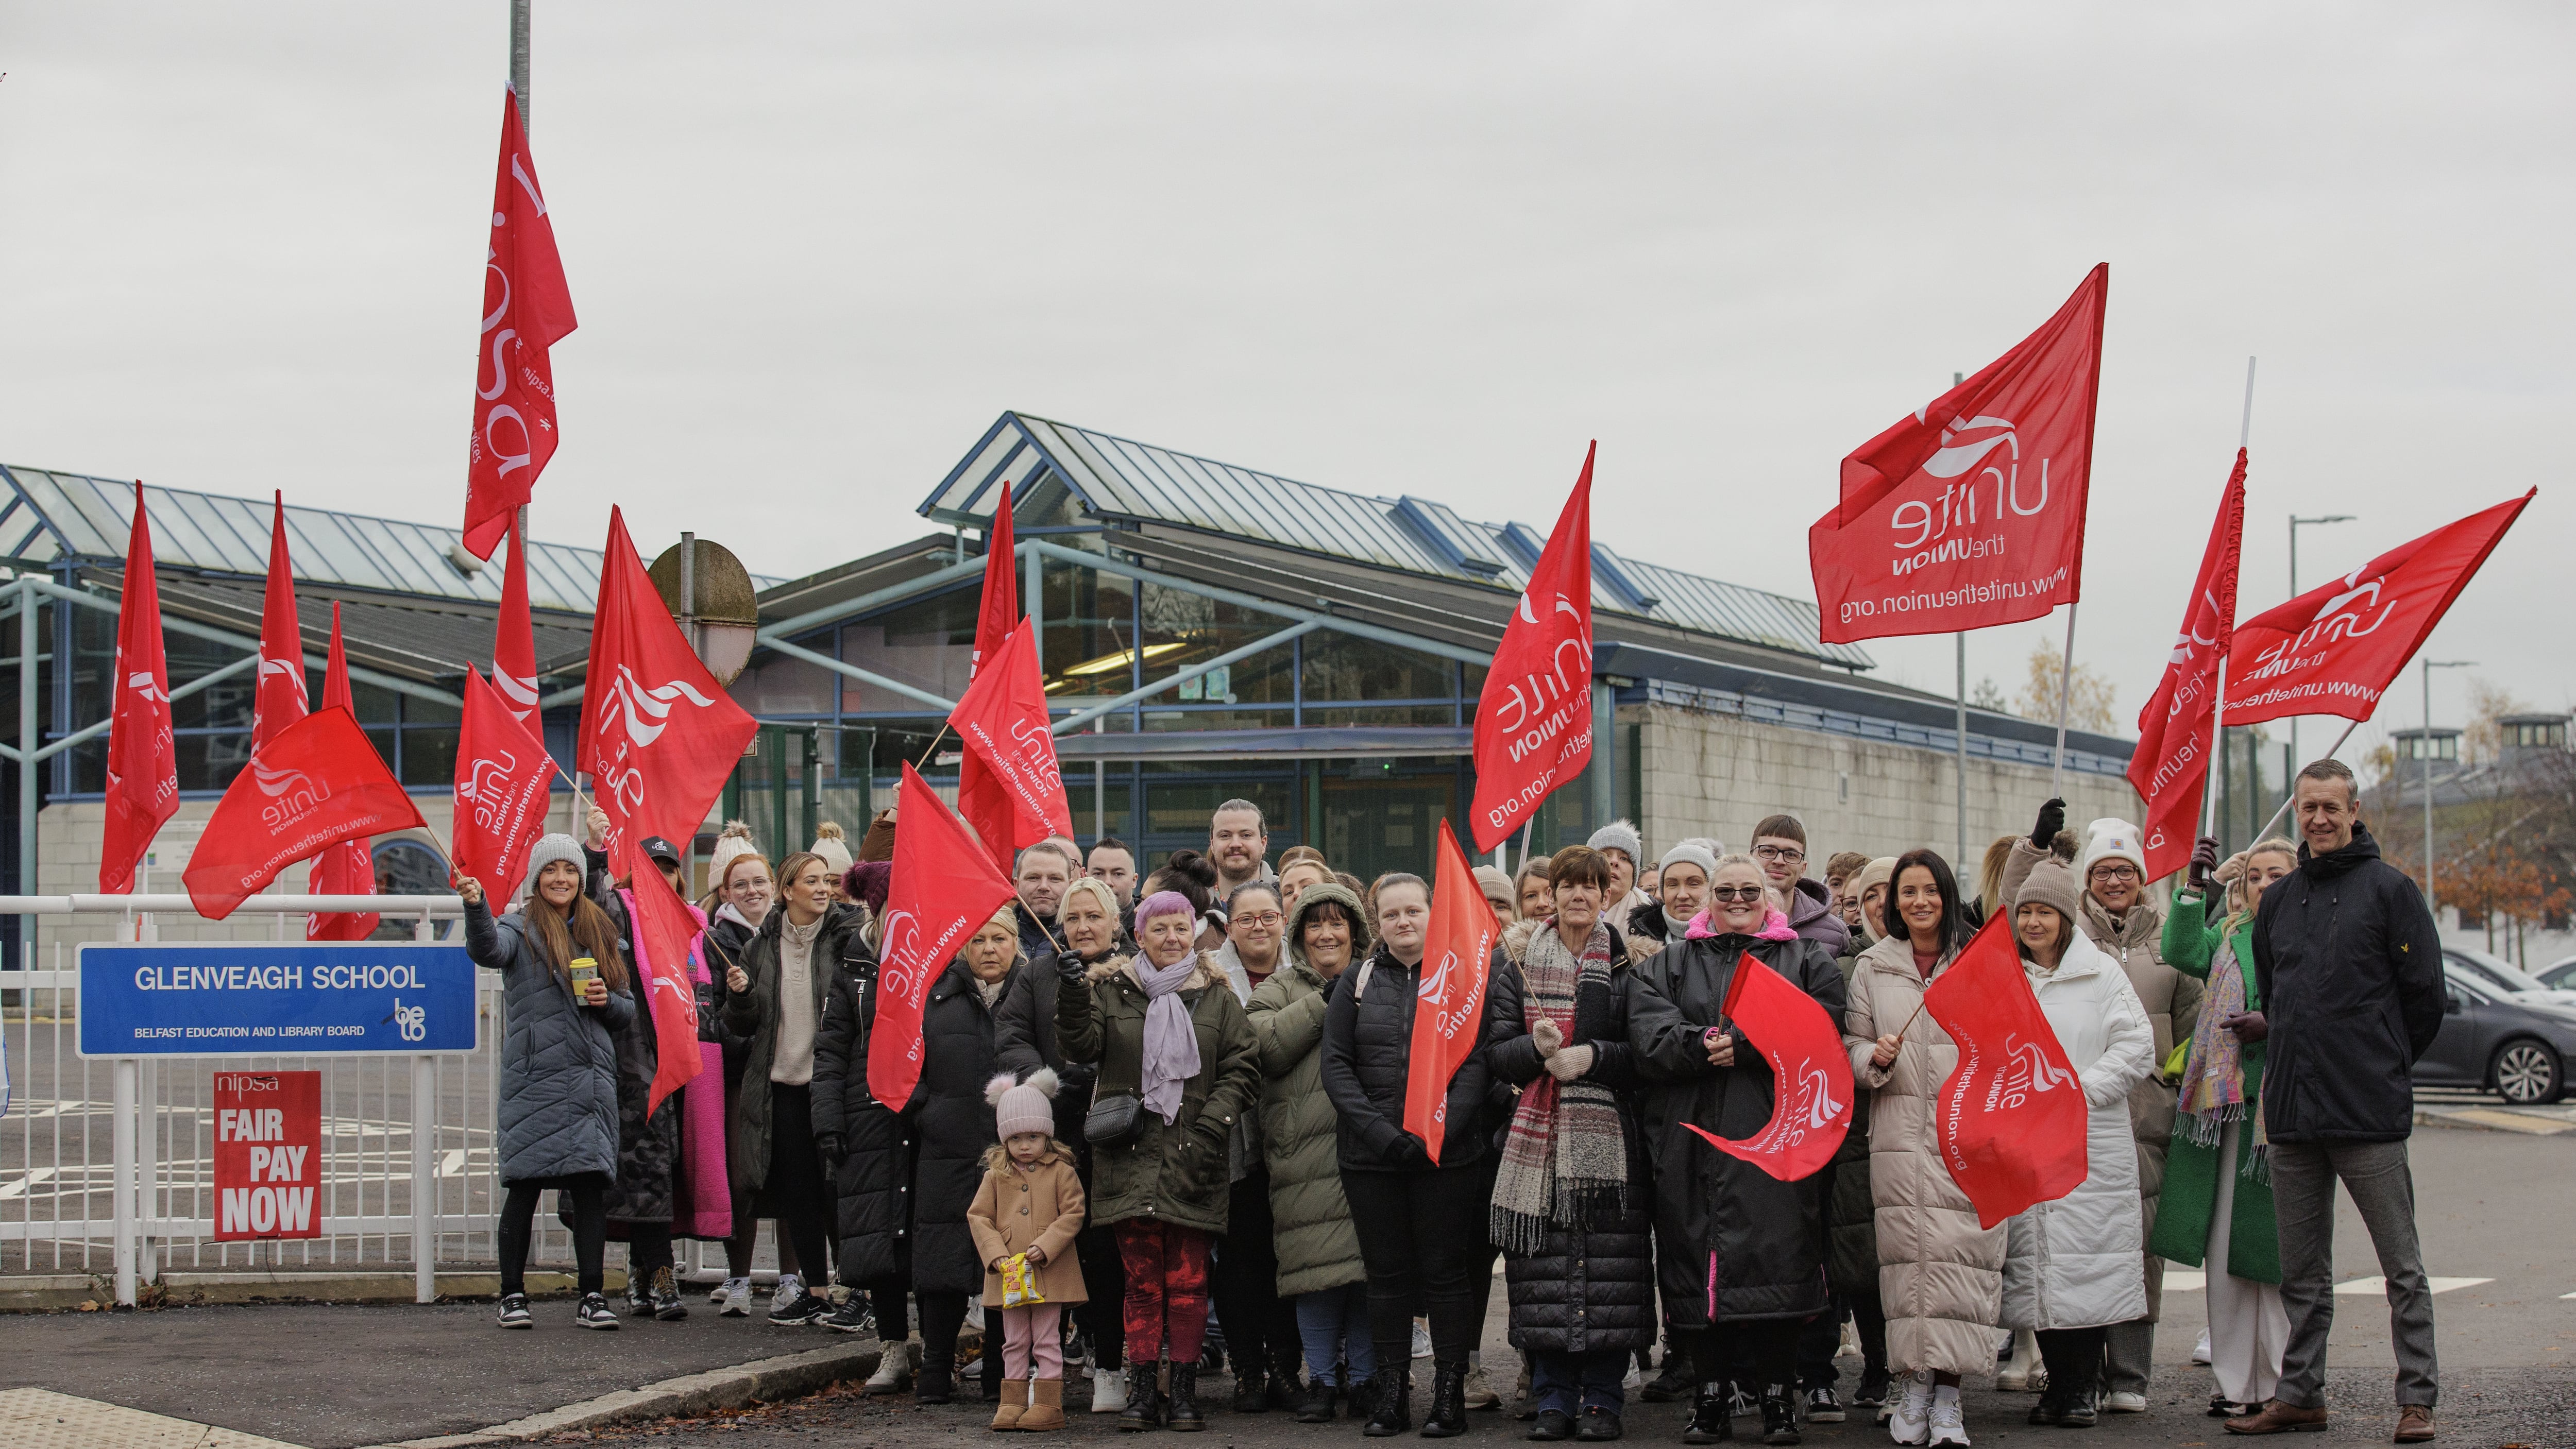 School support staff will go on strike this week, following similar action last year